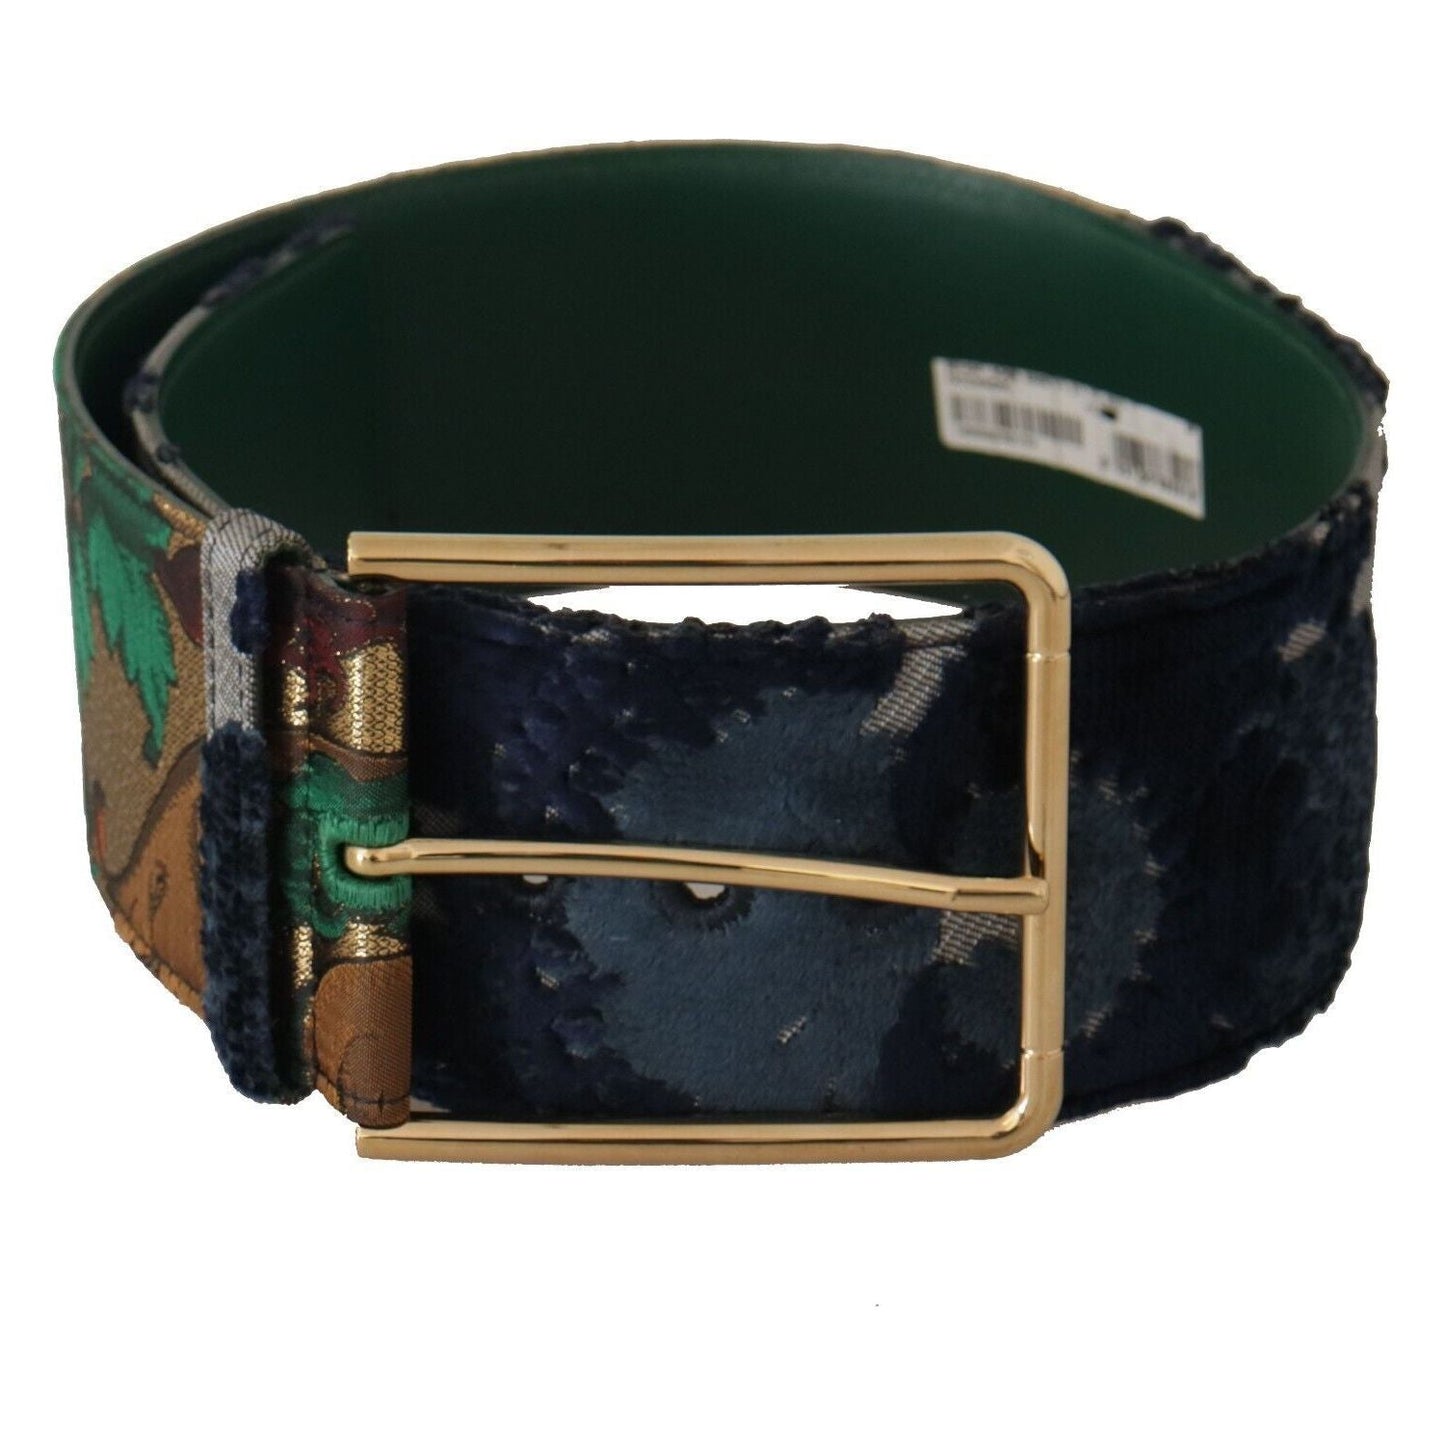 Dolce & Gabbana Elegant Leather Belt with Engraved Buckle green-jaquard-embroid-leather-gold-metal-belt s-l1600-2023-06-12T114726.374-27fca4a2-29f_5a2bf5c3-f7f0-4d79-81e8-0657e4d7f969.jpg